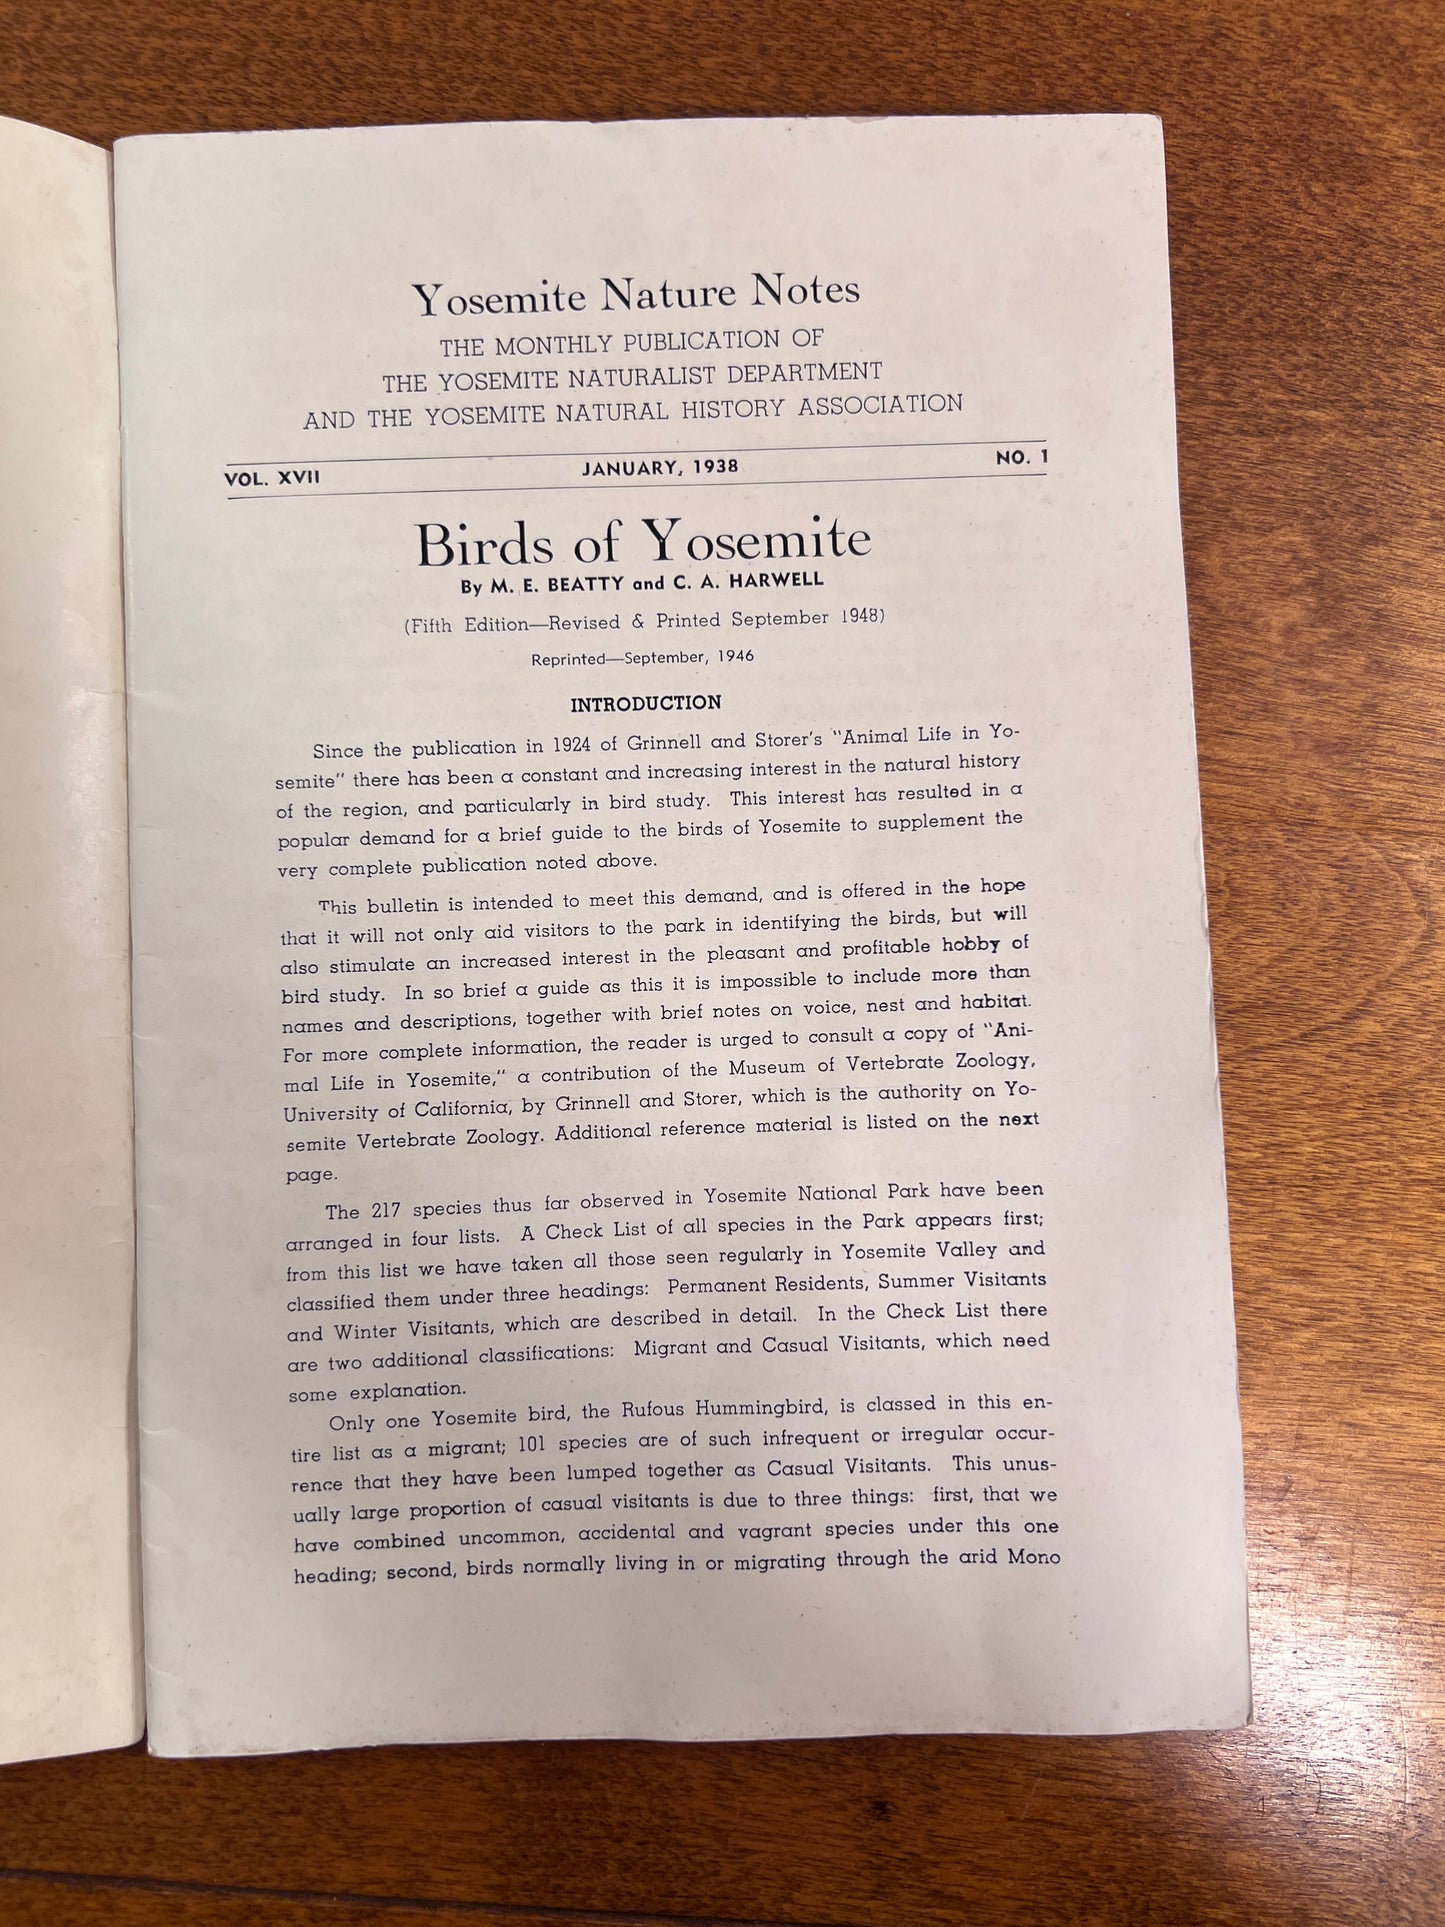 The Monthly Publication of the Yosemite Naturalist Dept. Birds of Yosemite by M.E. Beatty and C.A. Harwell